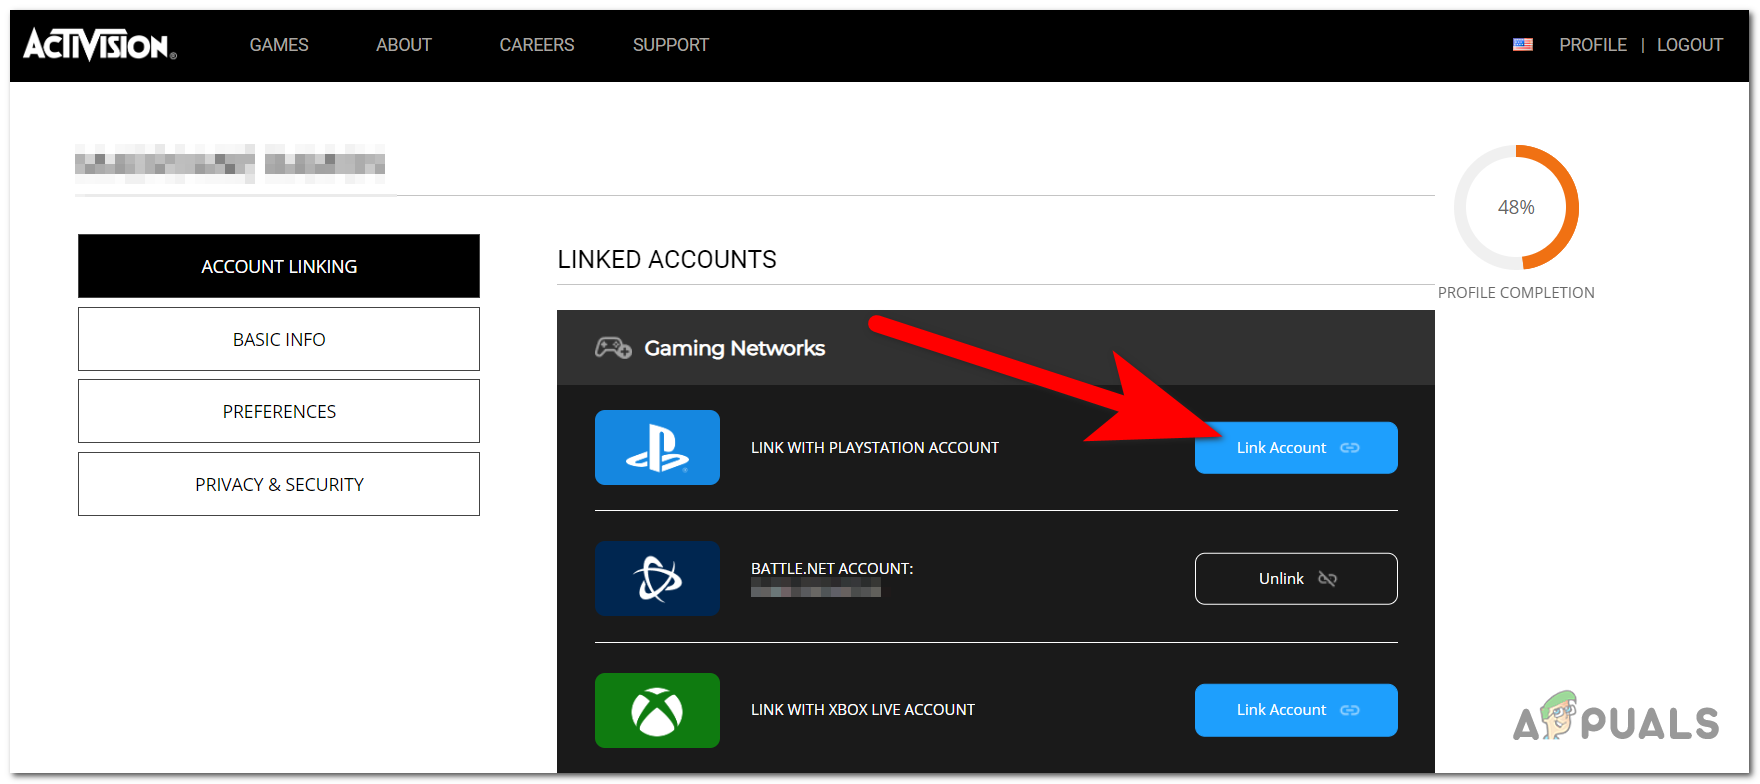 Linking your PlayStation account